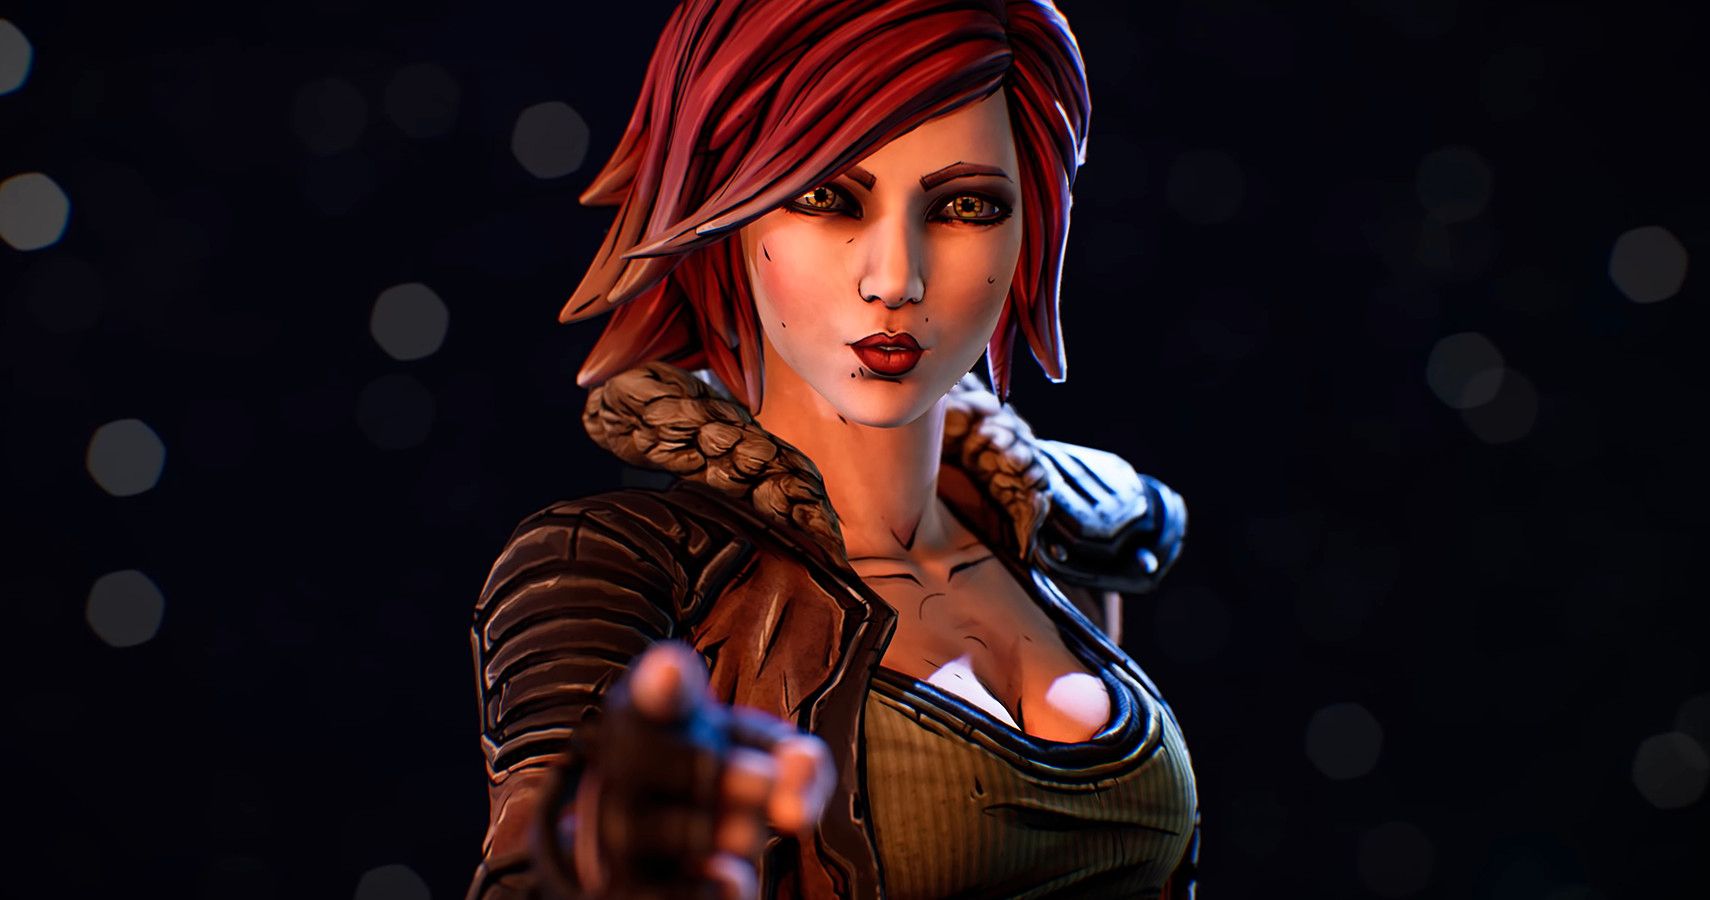 Image for Cate Blanchett is in talks to play Lilith in screen adaptation of Borderlands